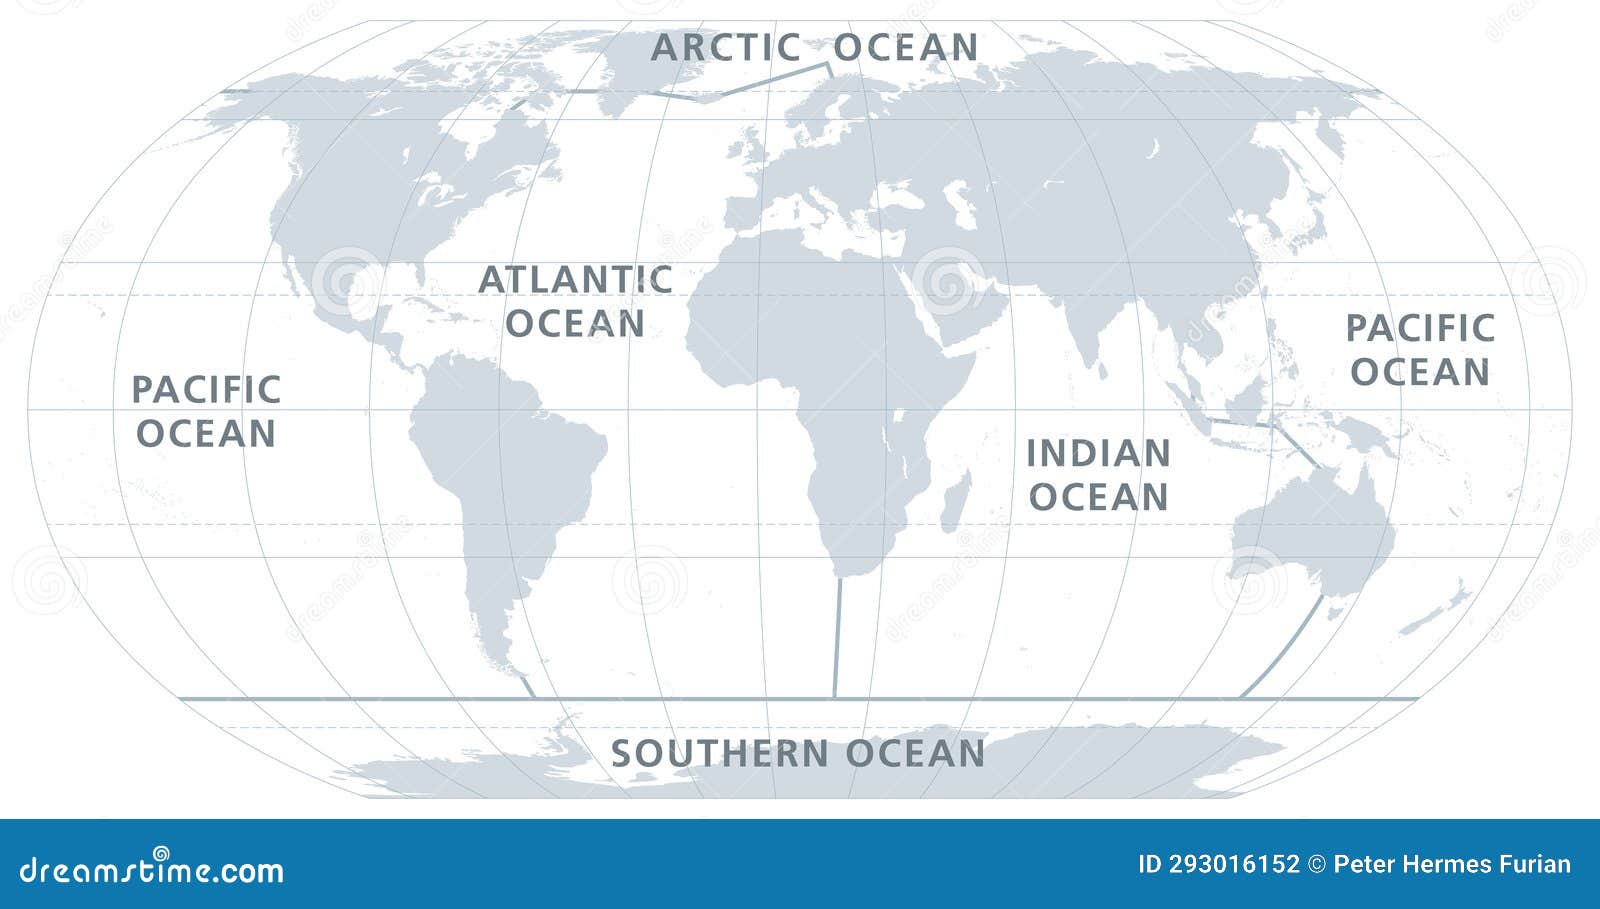 the five oceans of the world, model of oceanic divisions, gray map